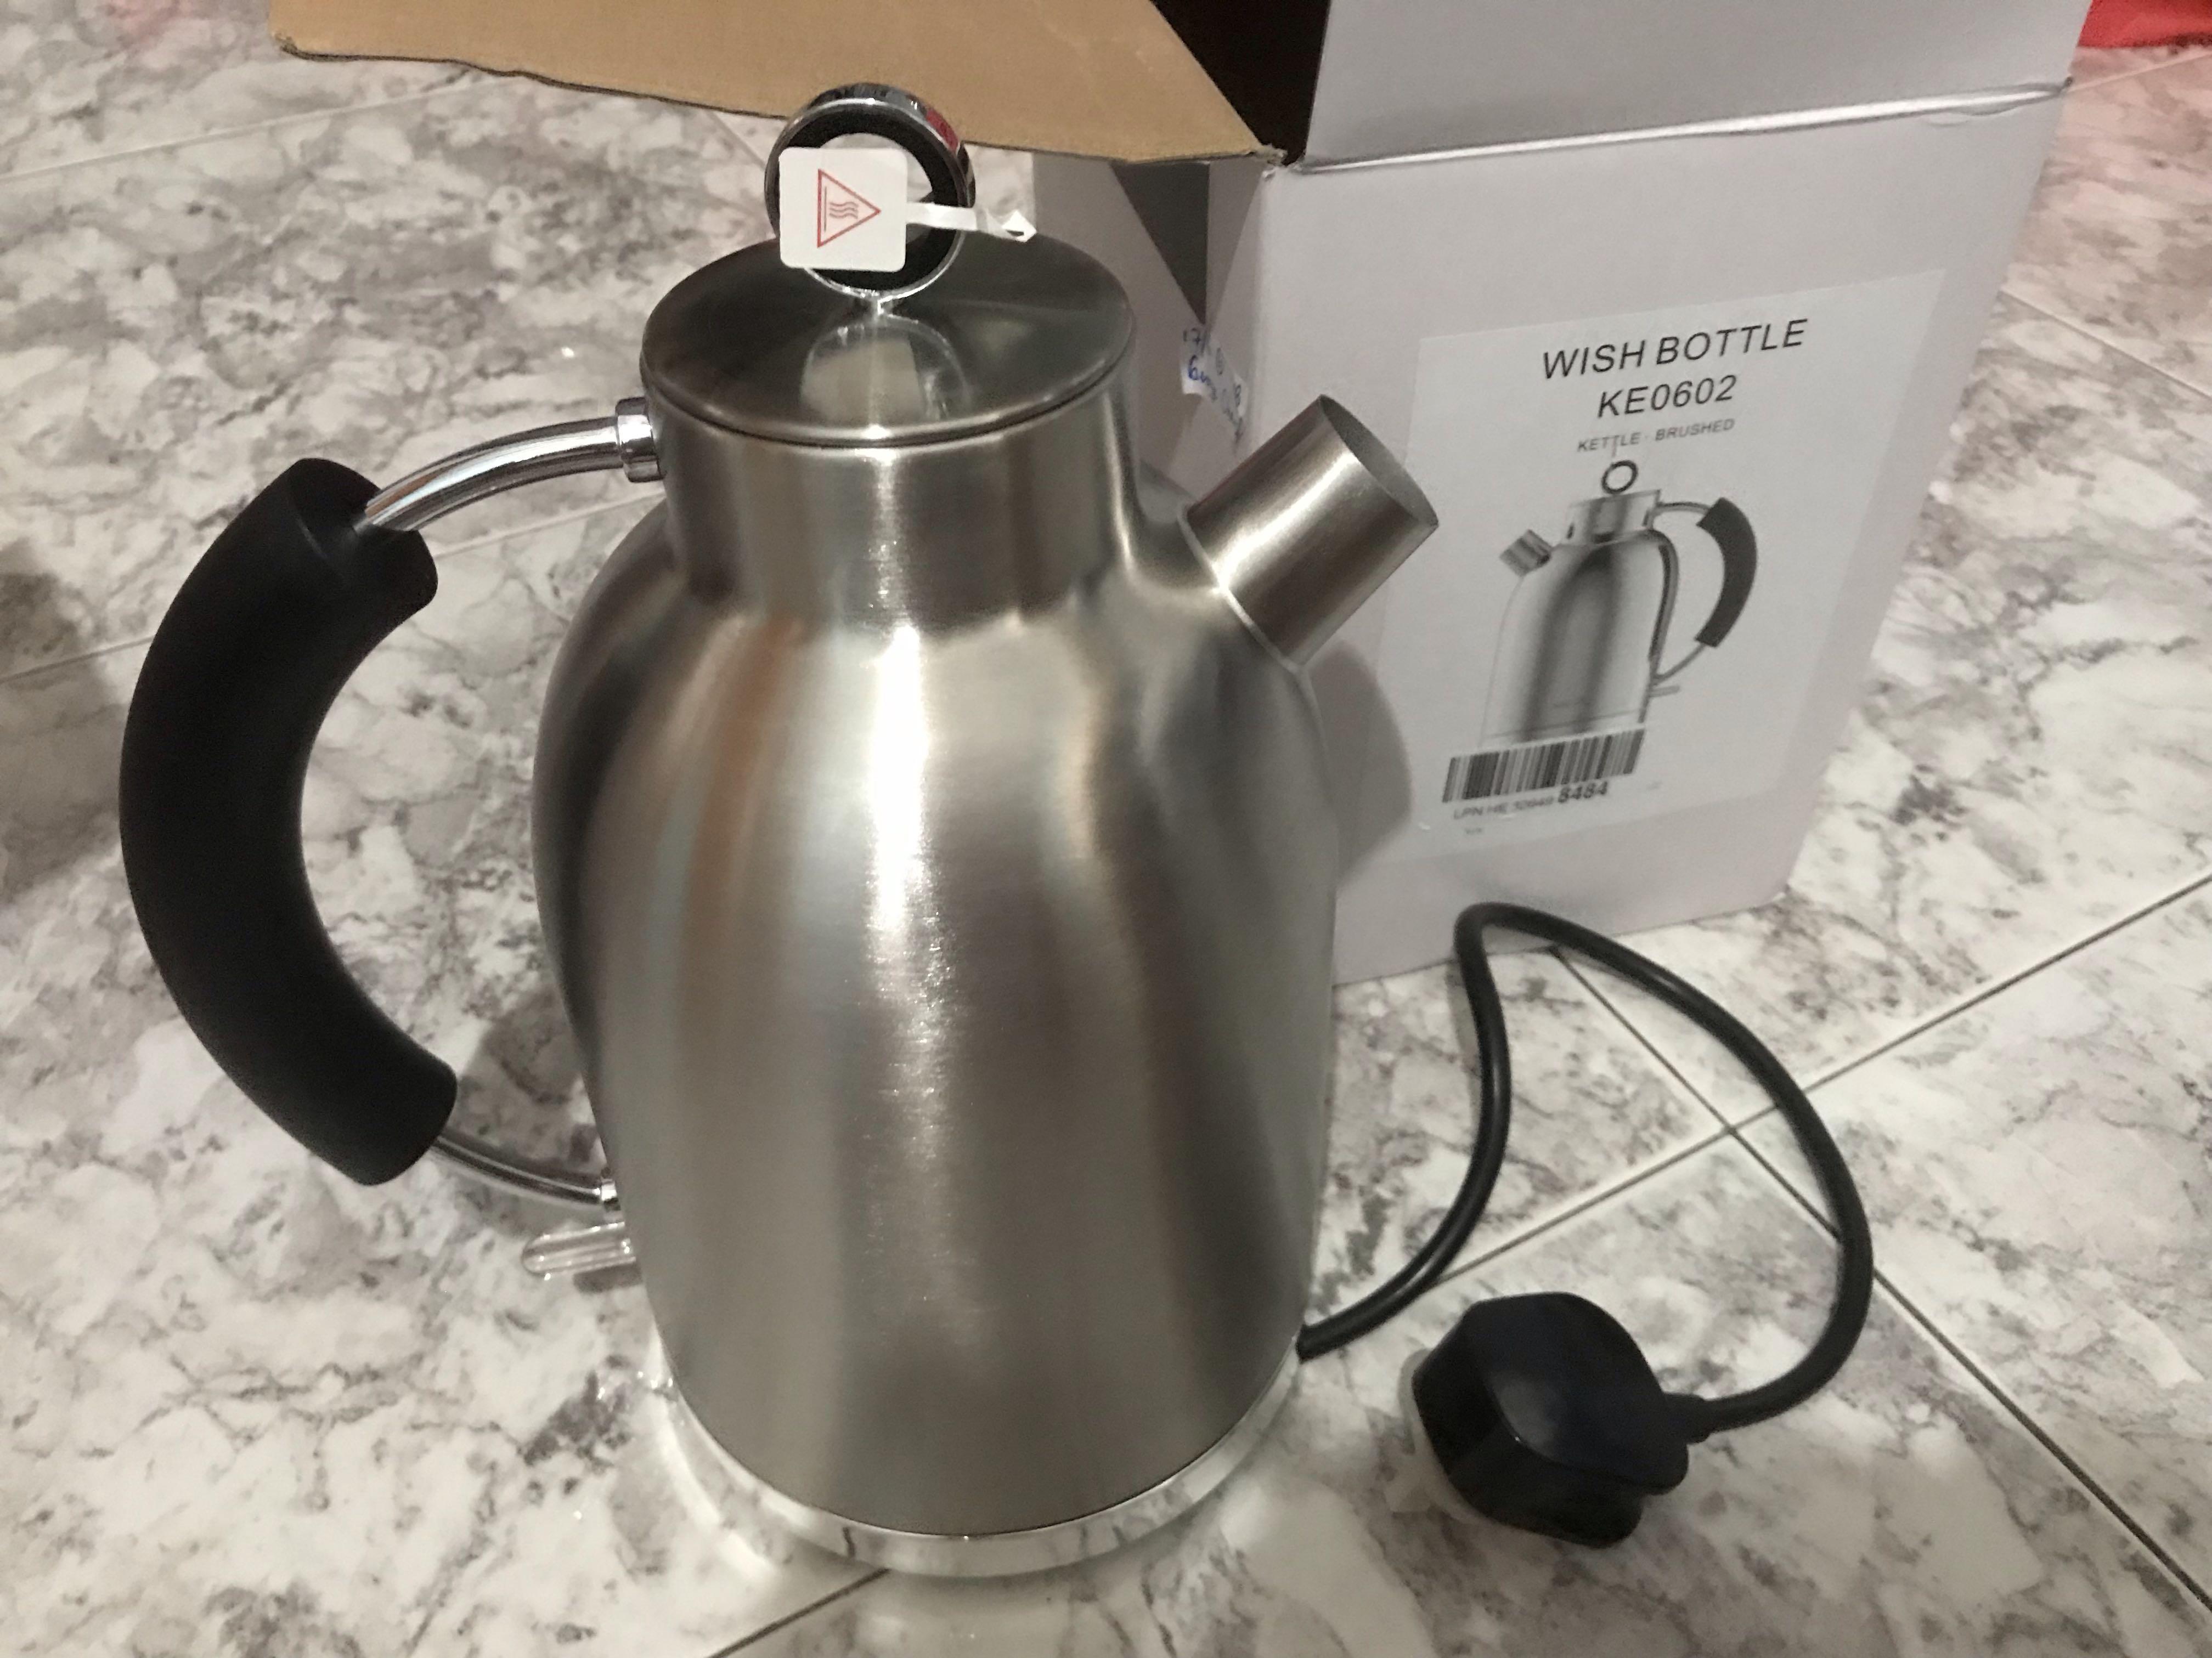 https://media.karousell.com/media/photos/products/2019/07/02/ascot_electric_kettle17qt_hot_water__tea_heater_with_food_grade_stainless_steel_design_1562055090_7c443307_progressive.jpg